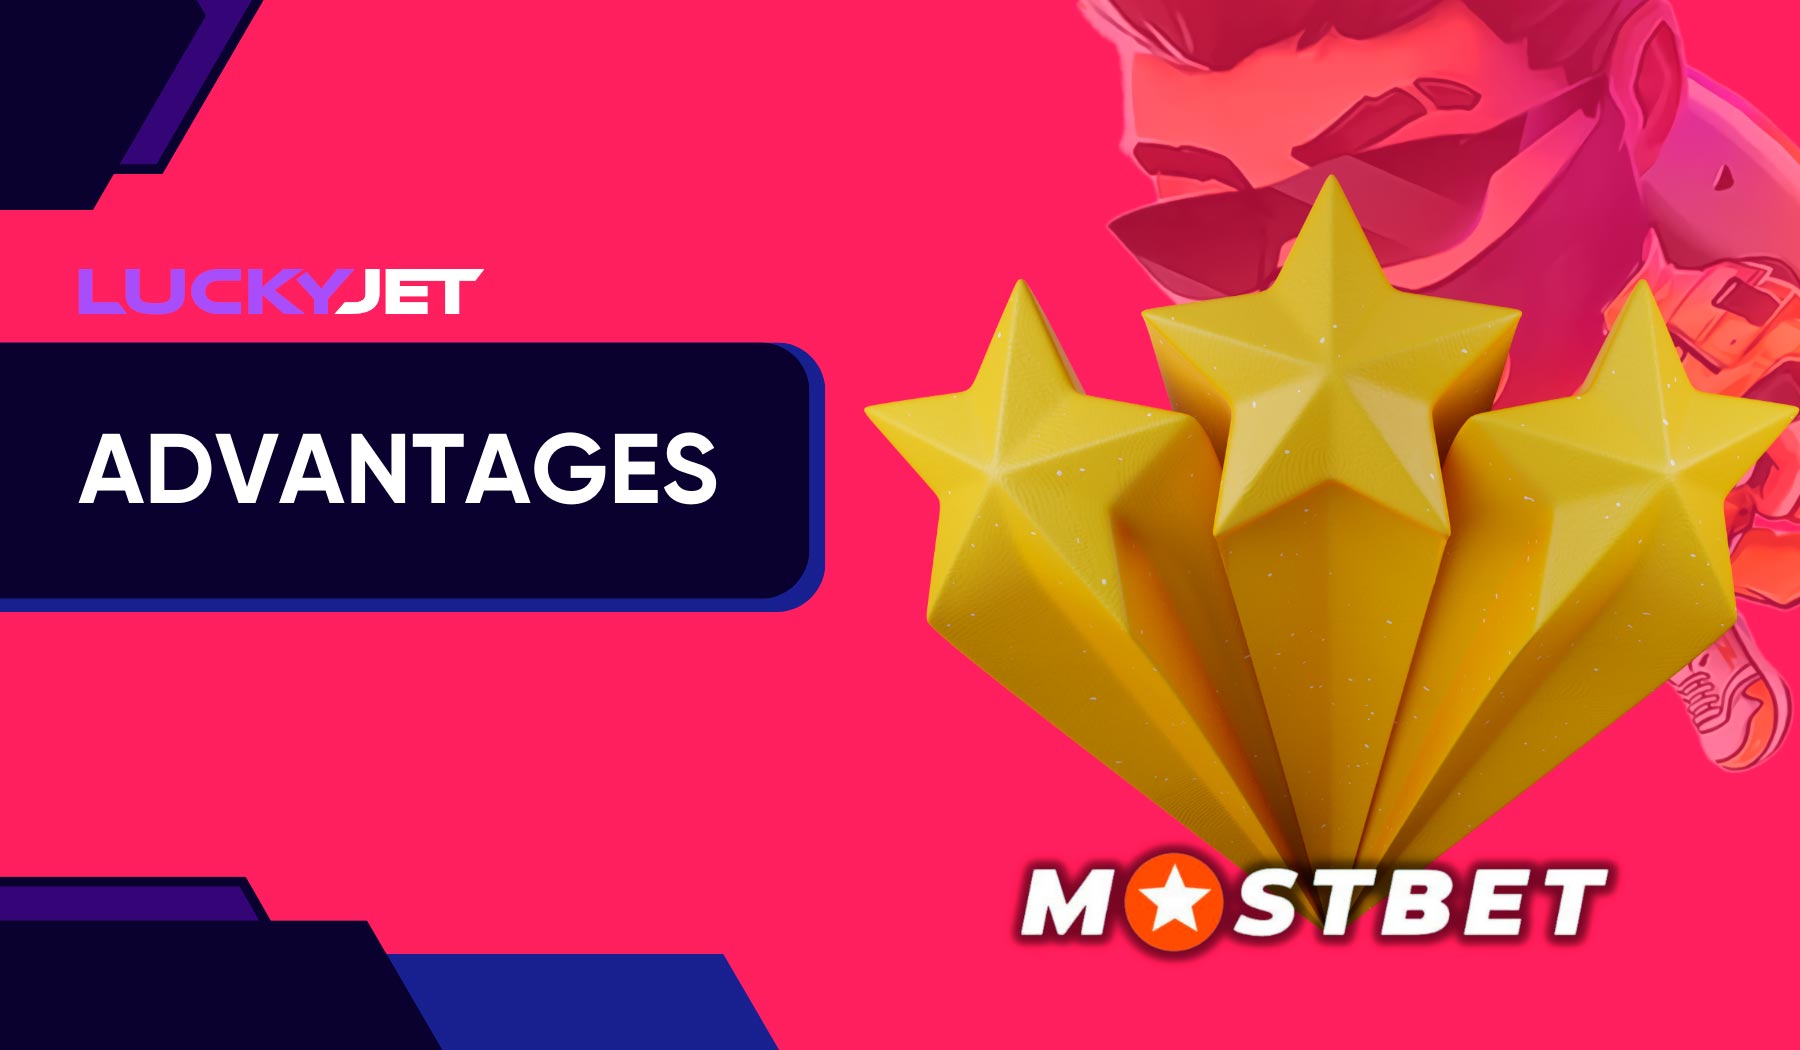 What are the Benefits of Mostbet Lucky Jet